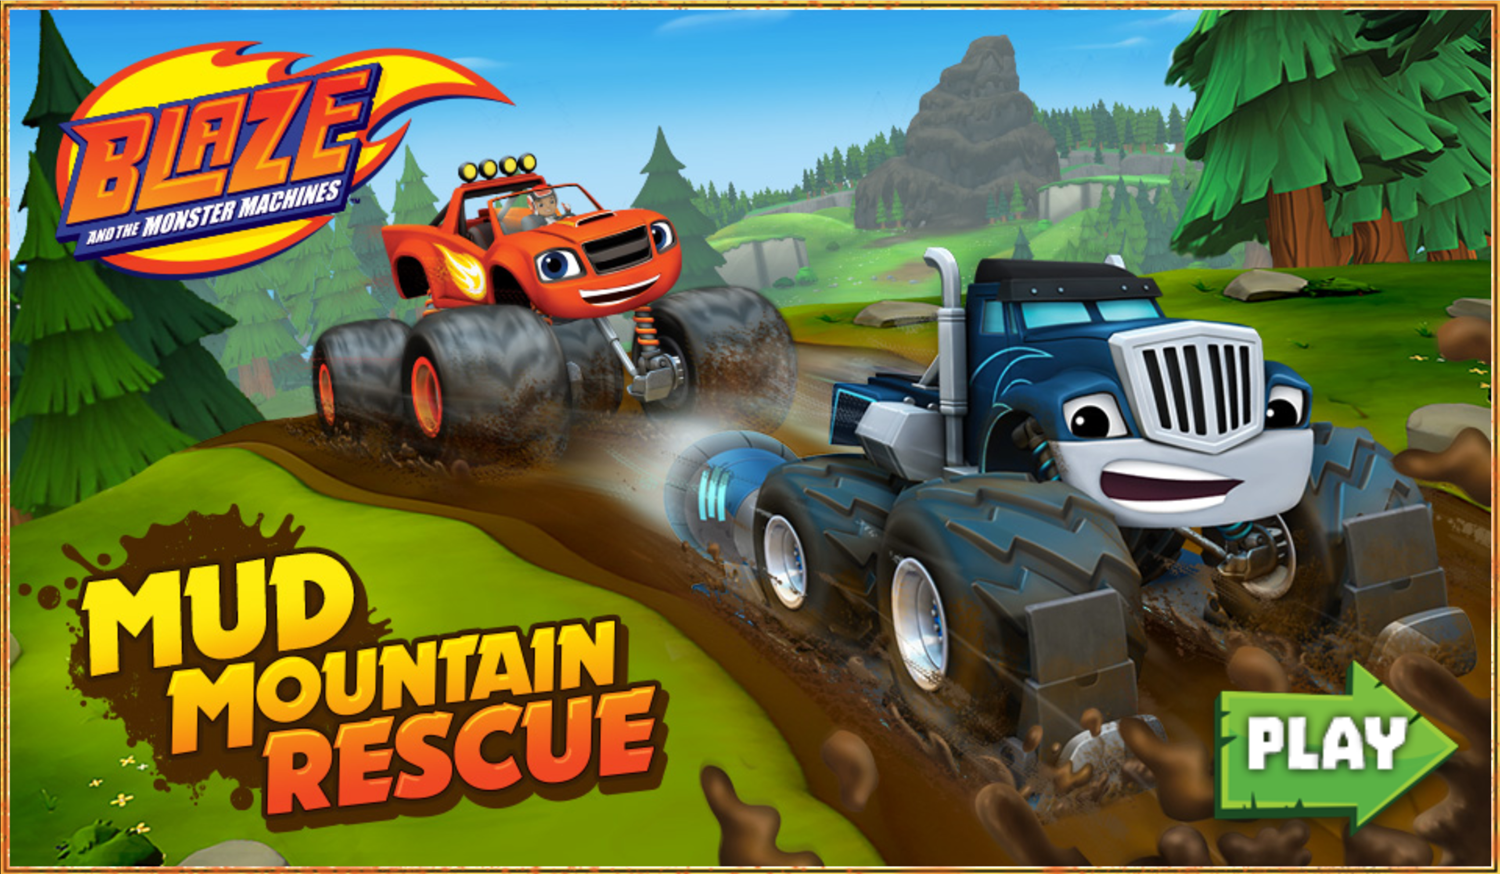 Blaze and the Monster Machines Mud Mountain Rescue Game Welcome Screen Screenshot.